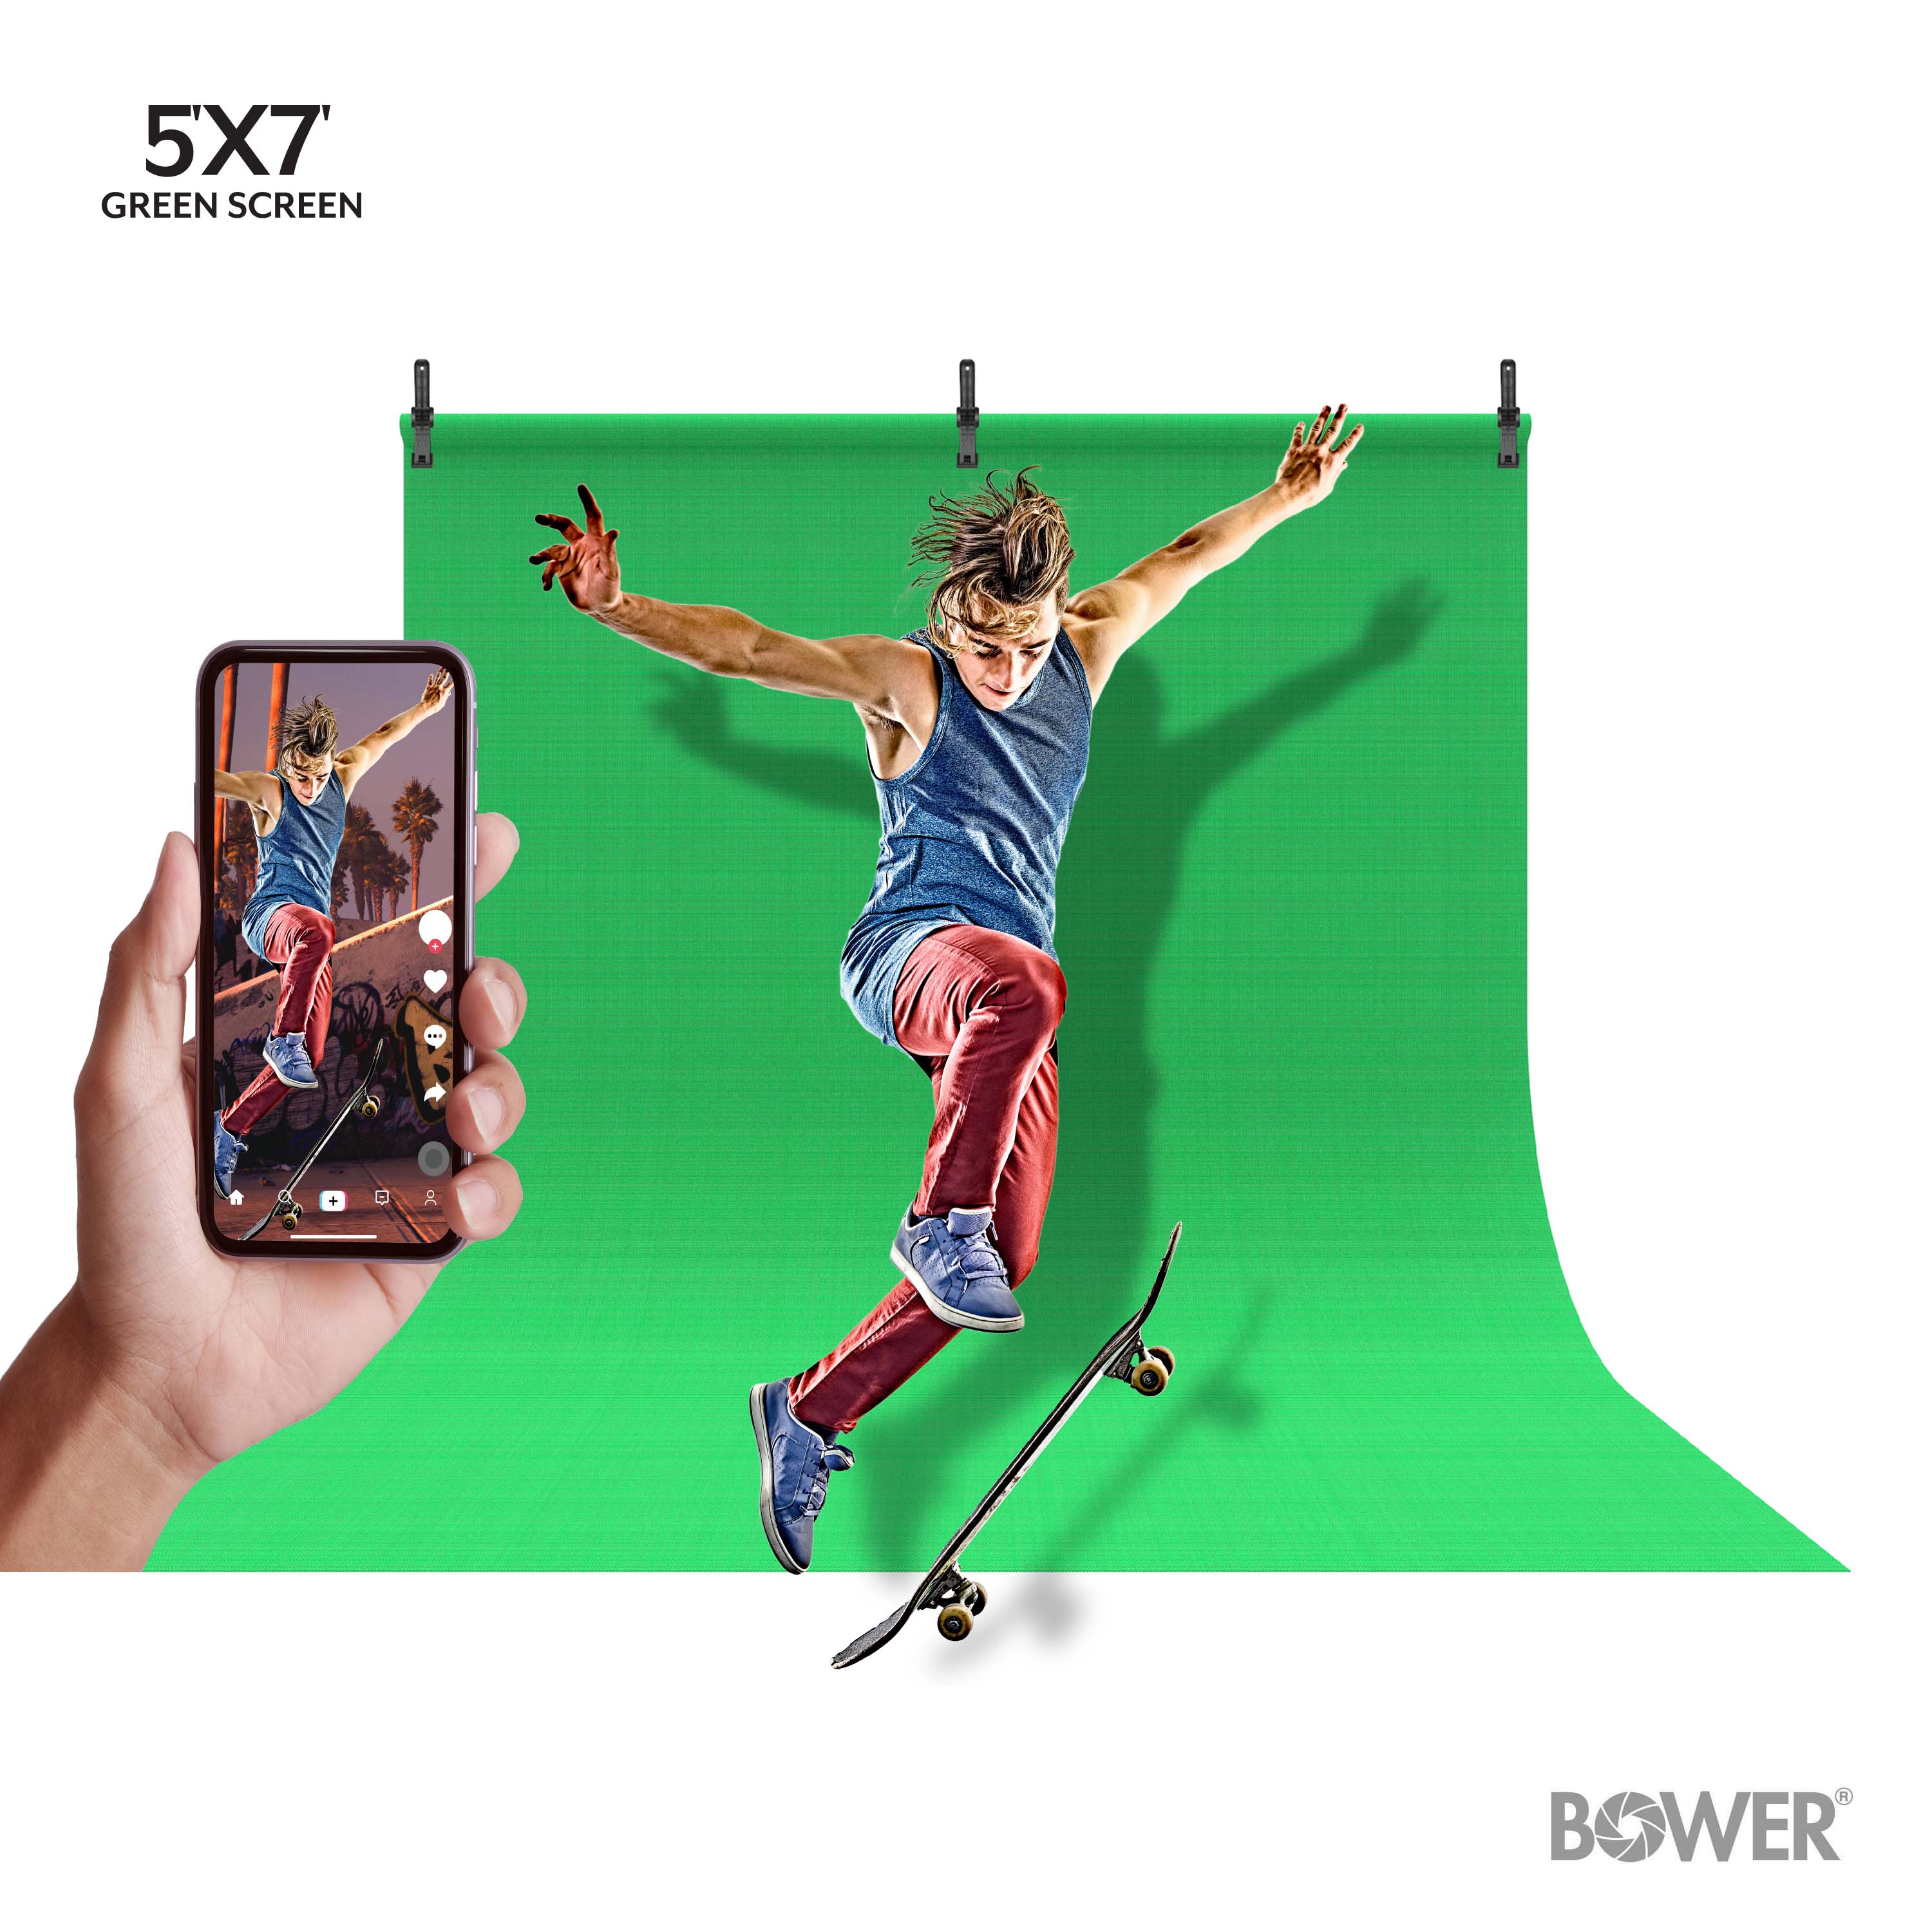 What Causes Iphone Green Screen?